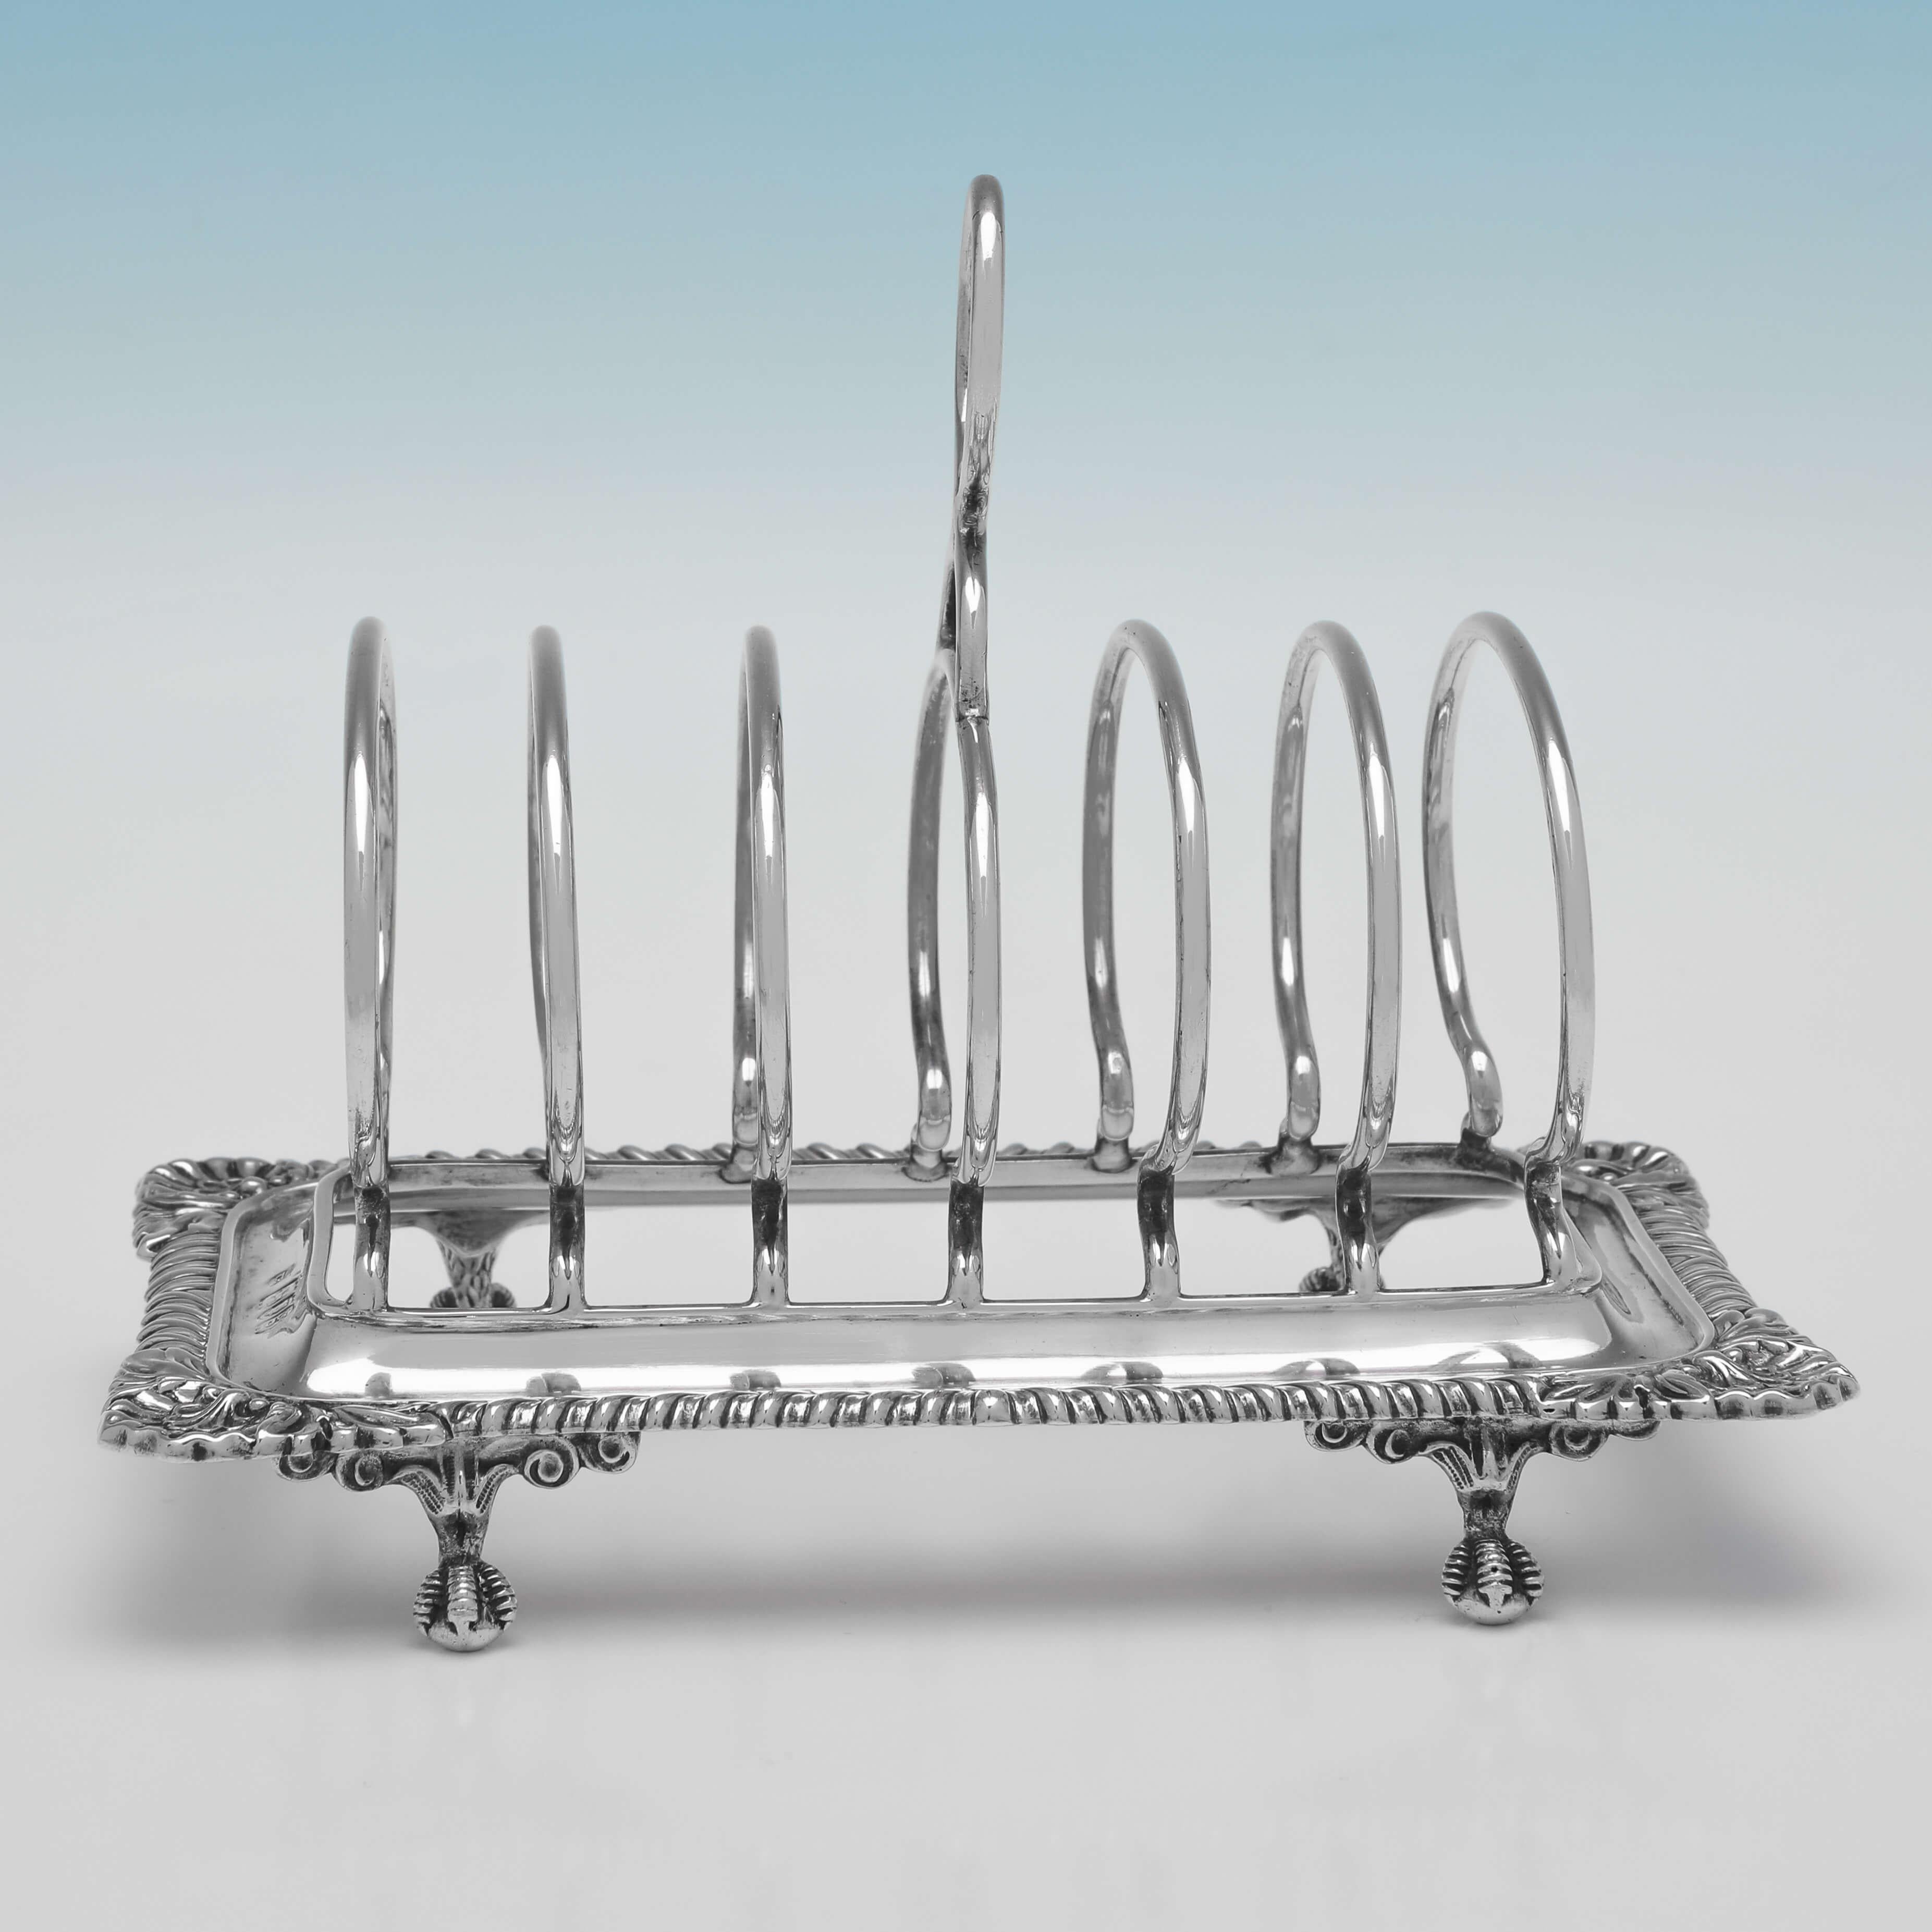 Hallmarked in London in 1902 by Thomas Bradbury & Sons, this attractive, Edwardian, antique sterling silver toast rack, will hold 6 pieces of toast, and features a shell and gadroon border, and ball & claw feet. 

The toast rack measures 5